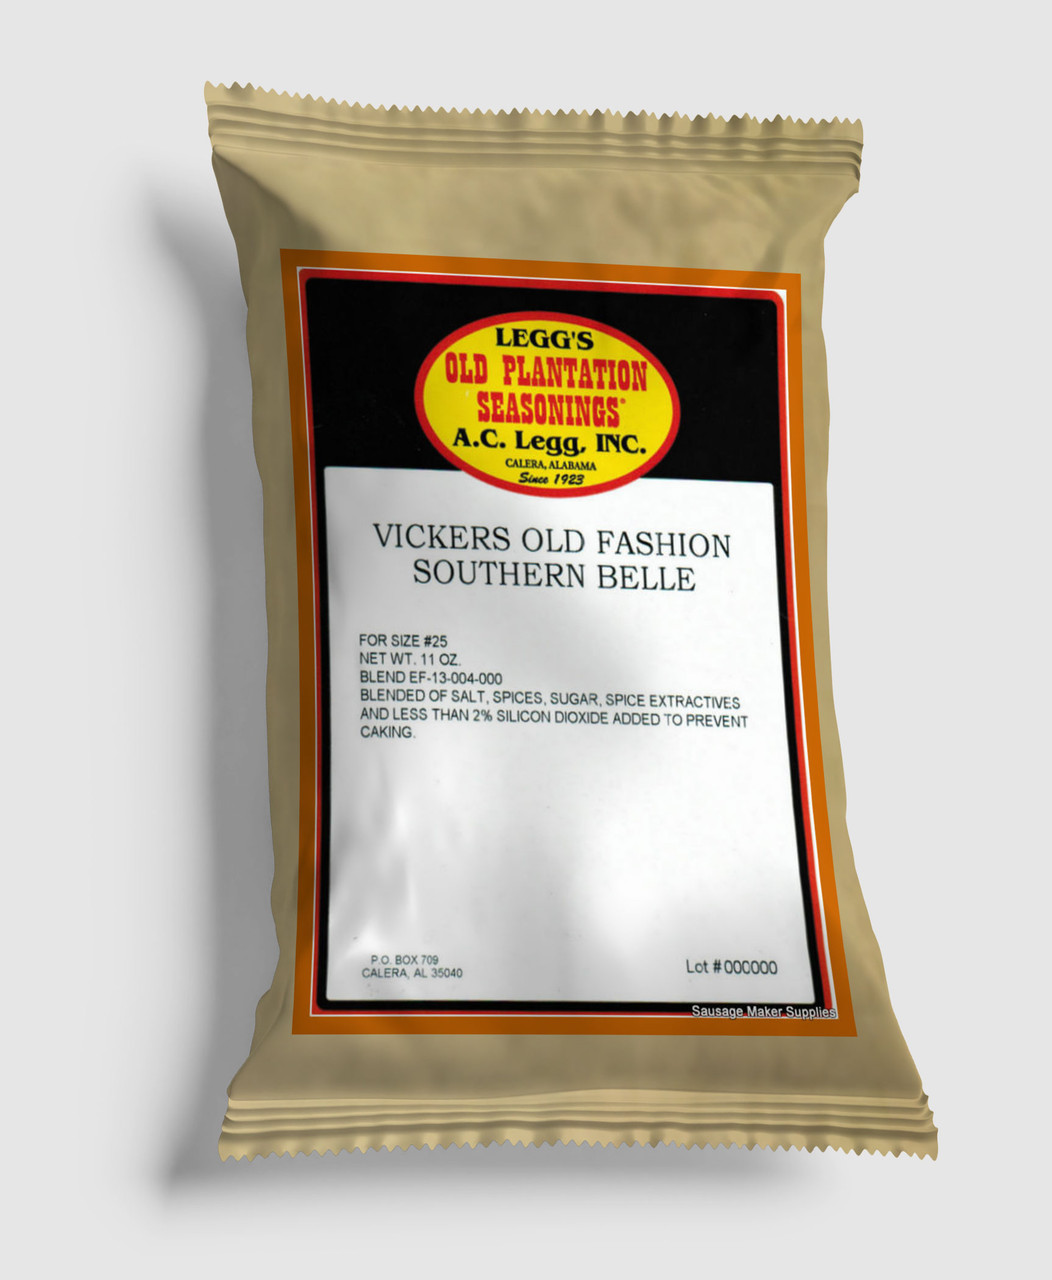 Vickers Old Fashion Southern Belle Sausage Seasoning